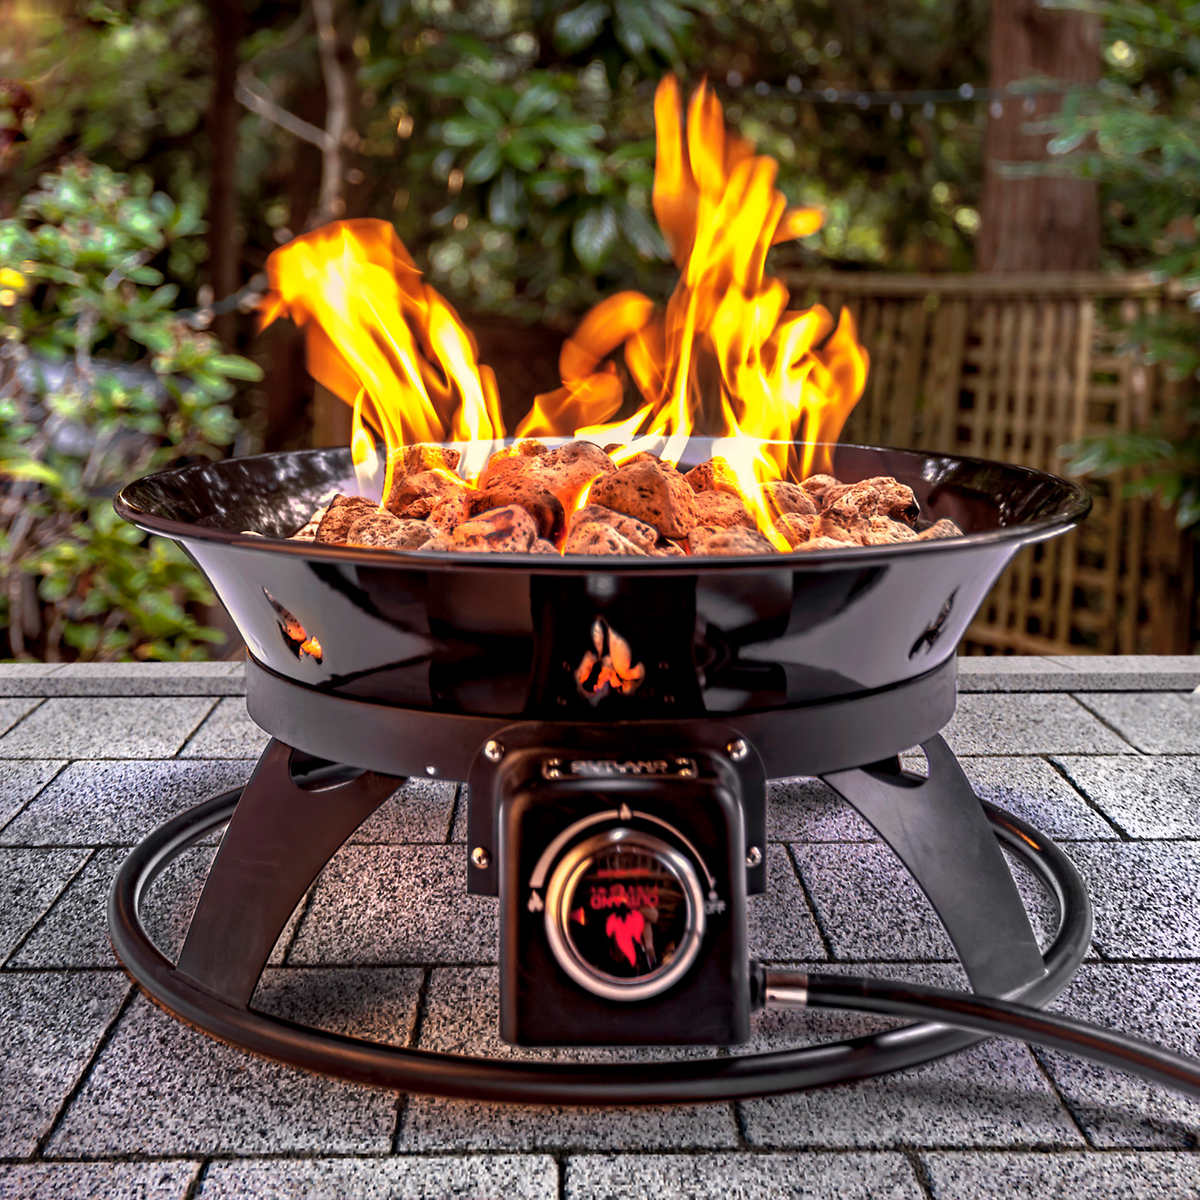 Outland Firebowl Outdoor Firepit Costco, How To Make A Portable Outdoor Fire Pit